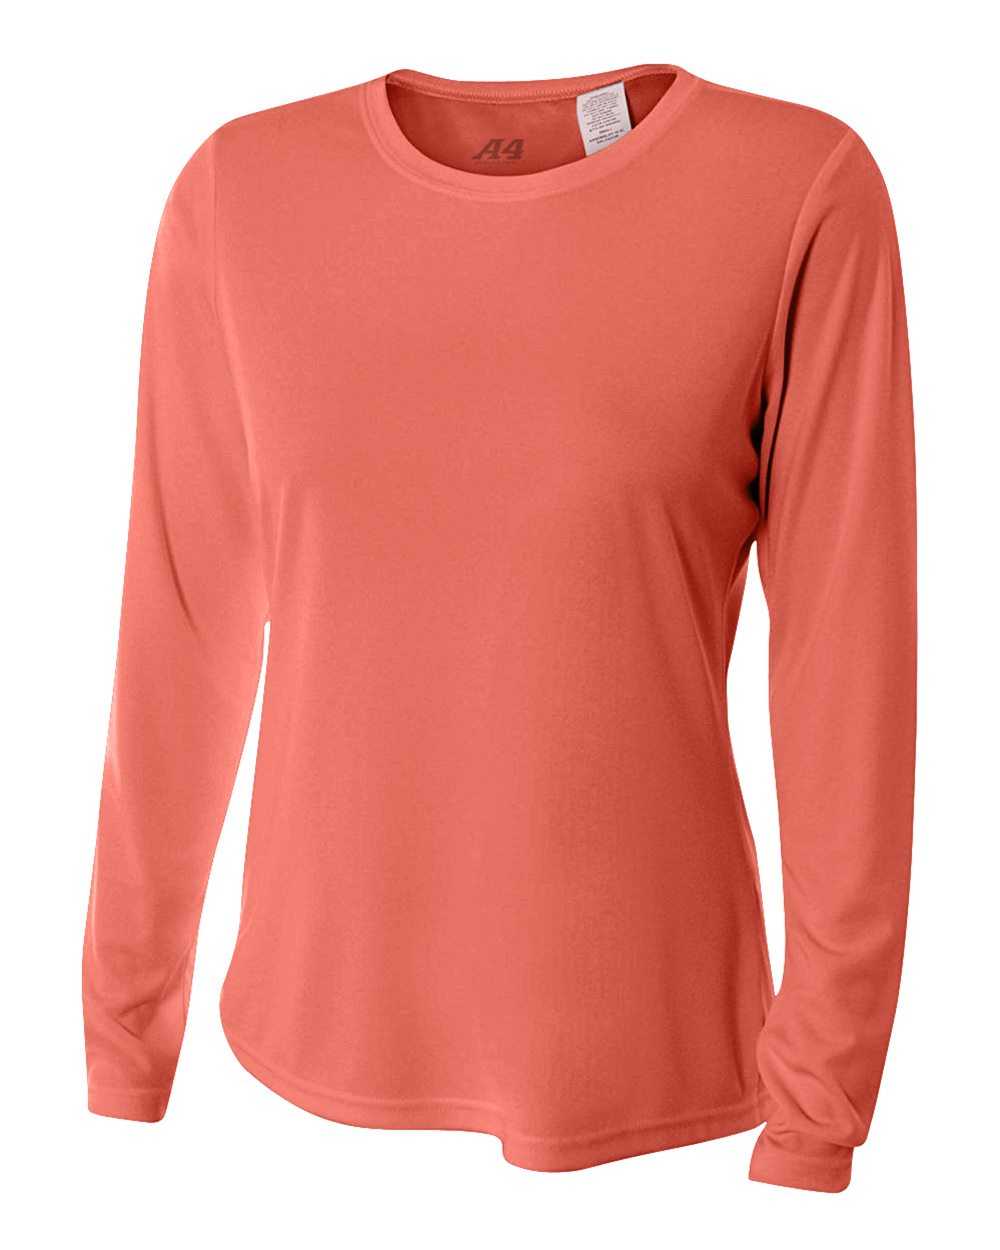 A4 NW3002 Women's Long Sleeve Performance Crew - Coral - HIT a Double